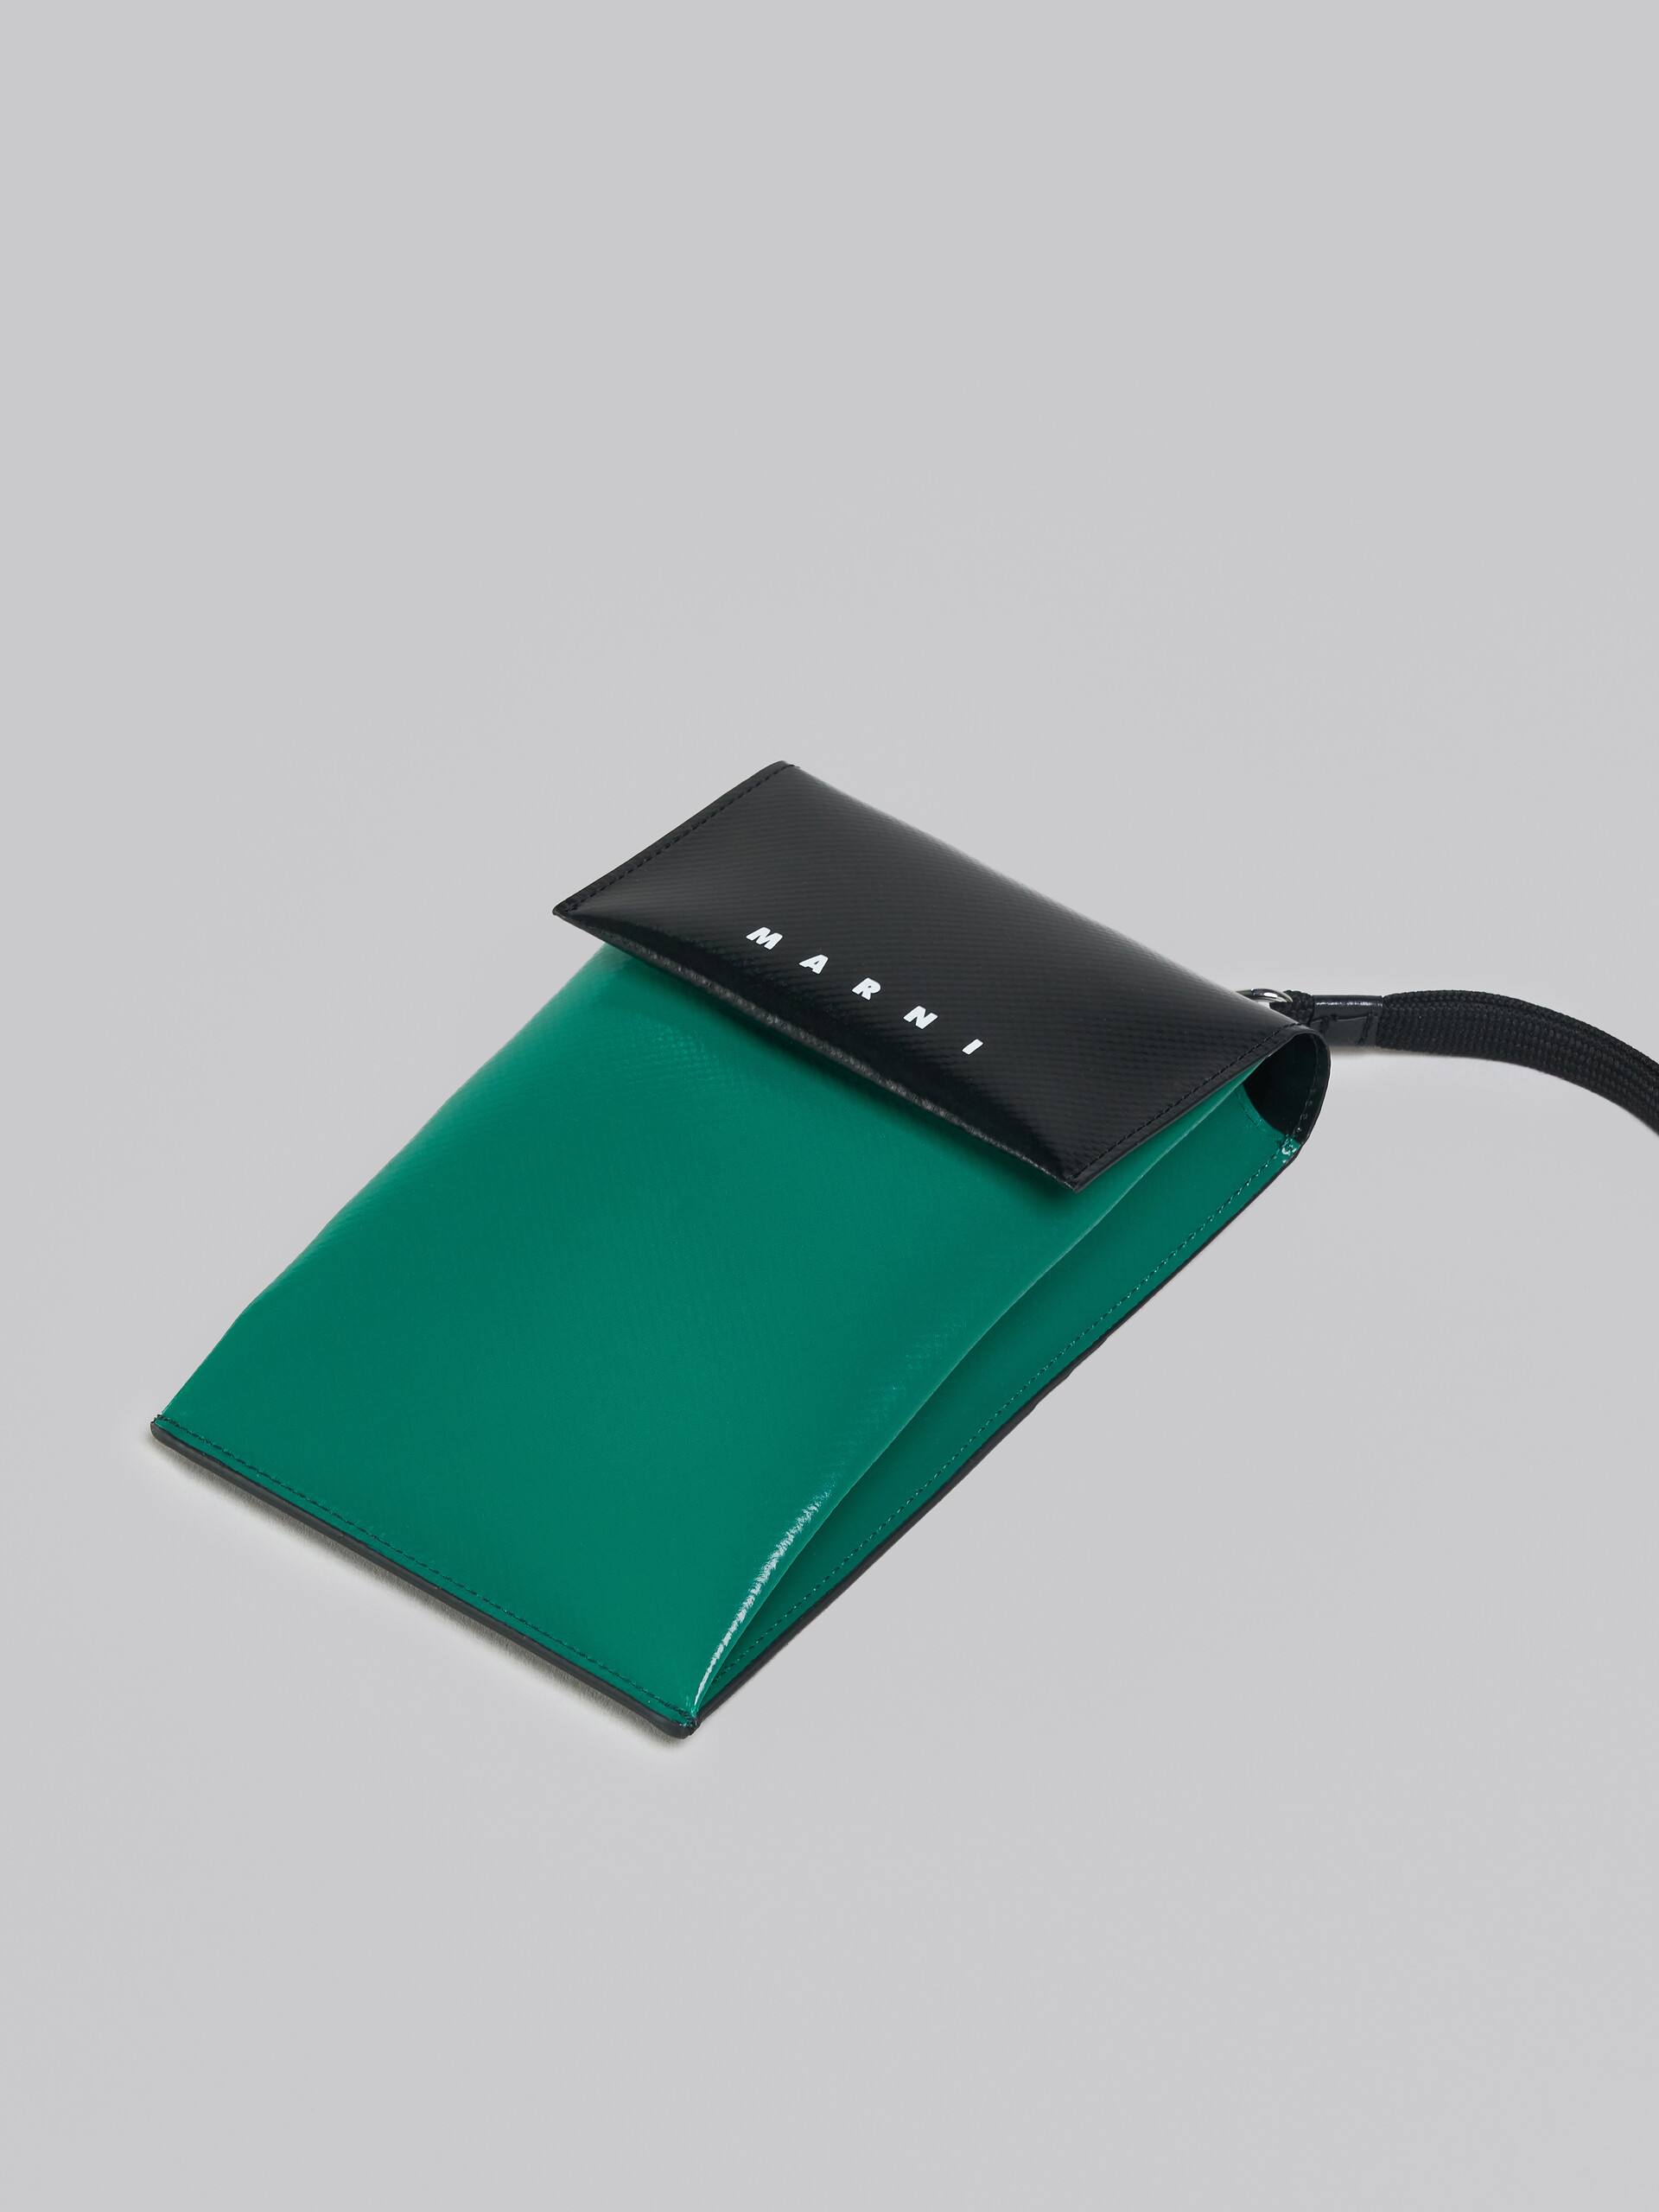 Tribeca green and black phone case - Wallets and Small Leather Goods - Image 4